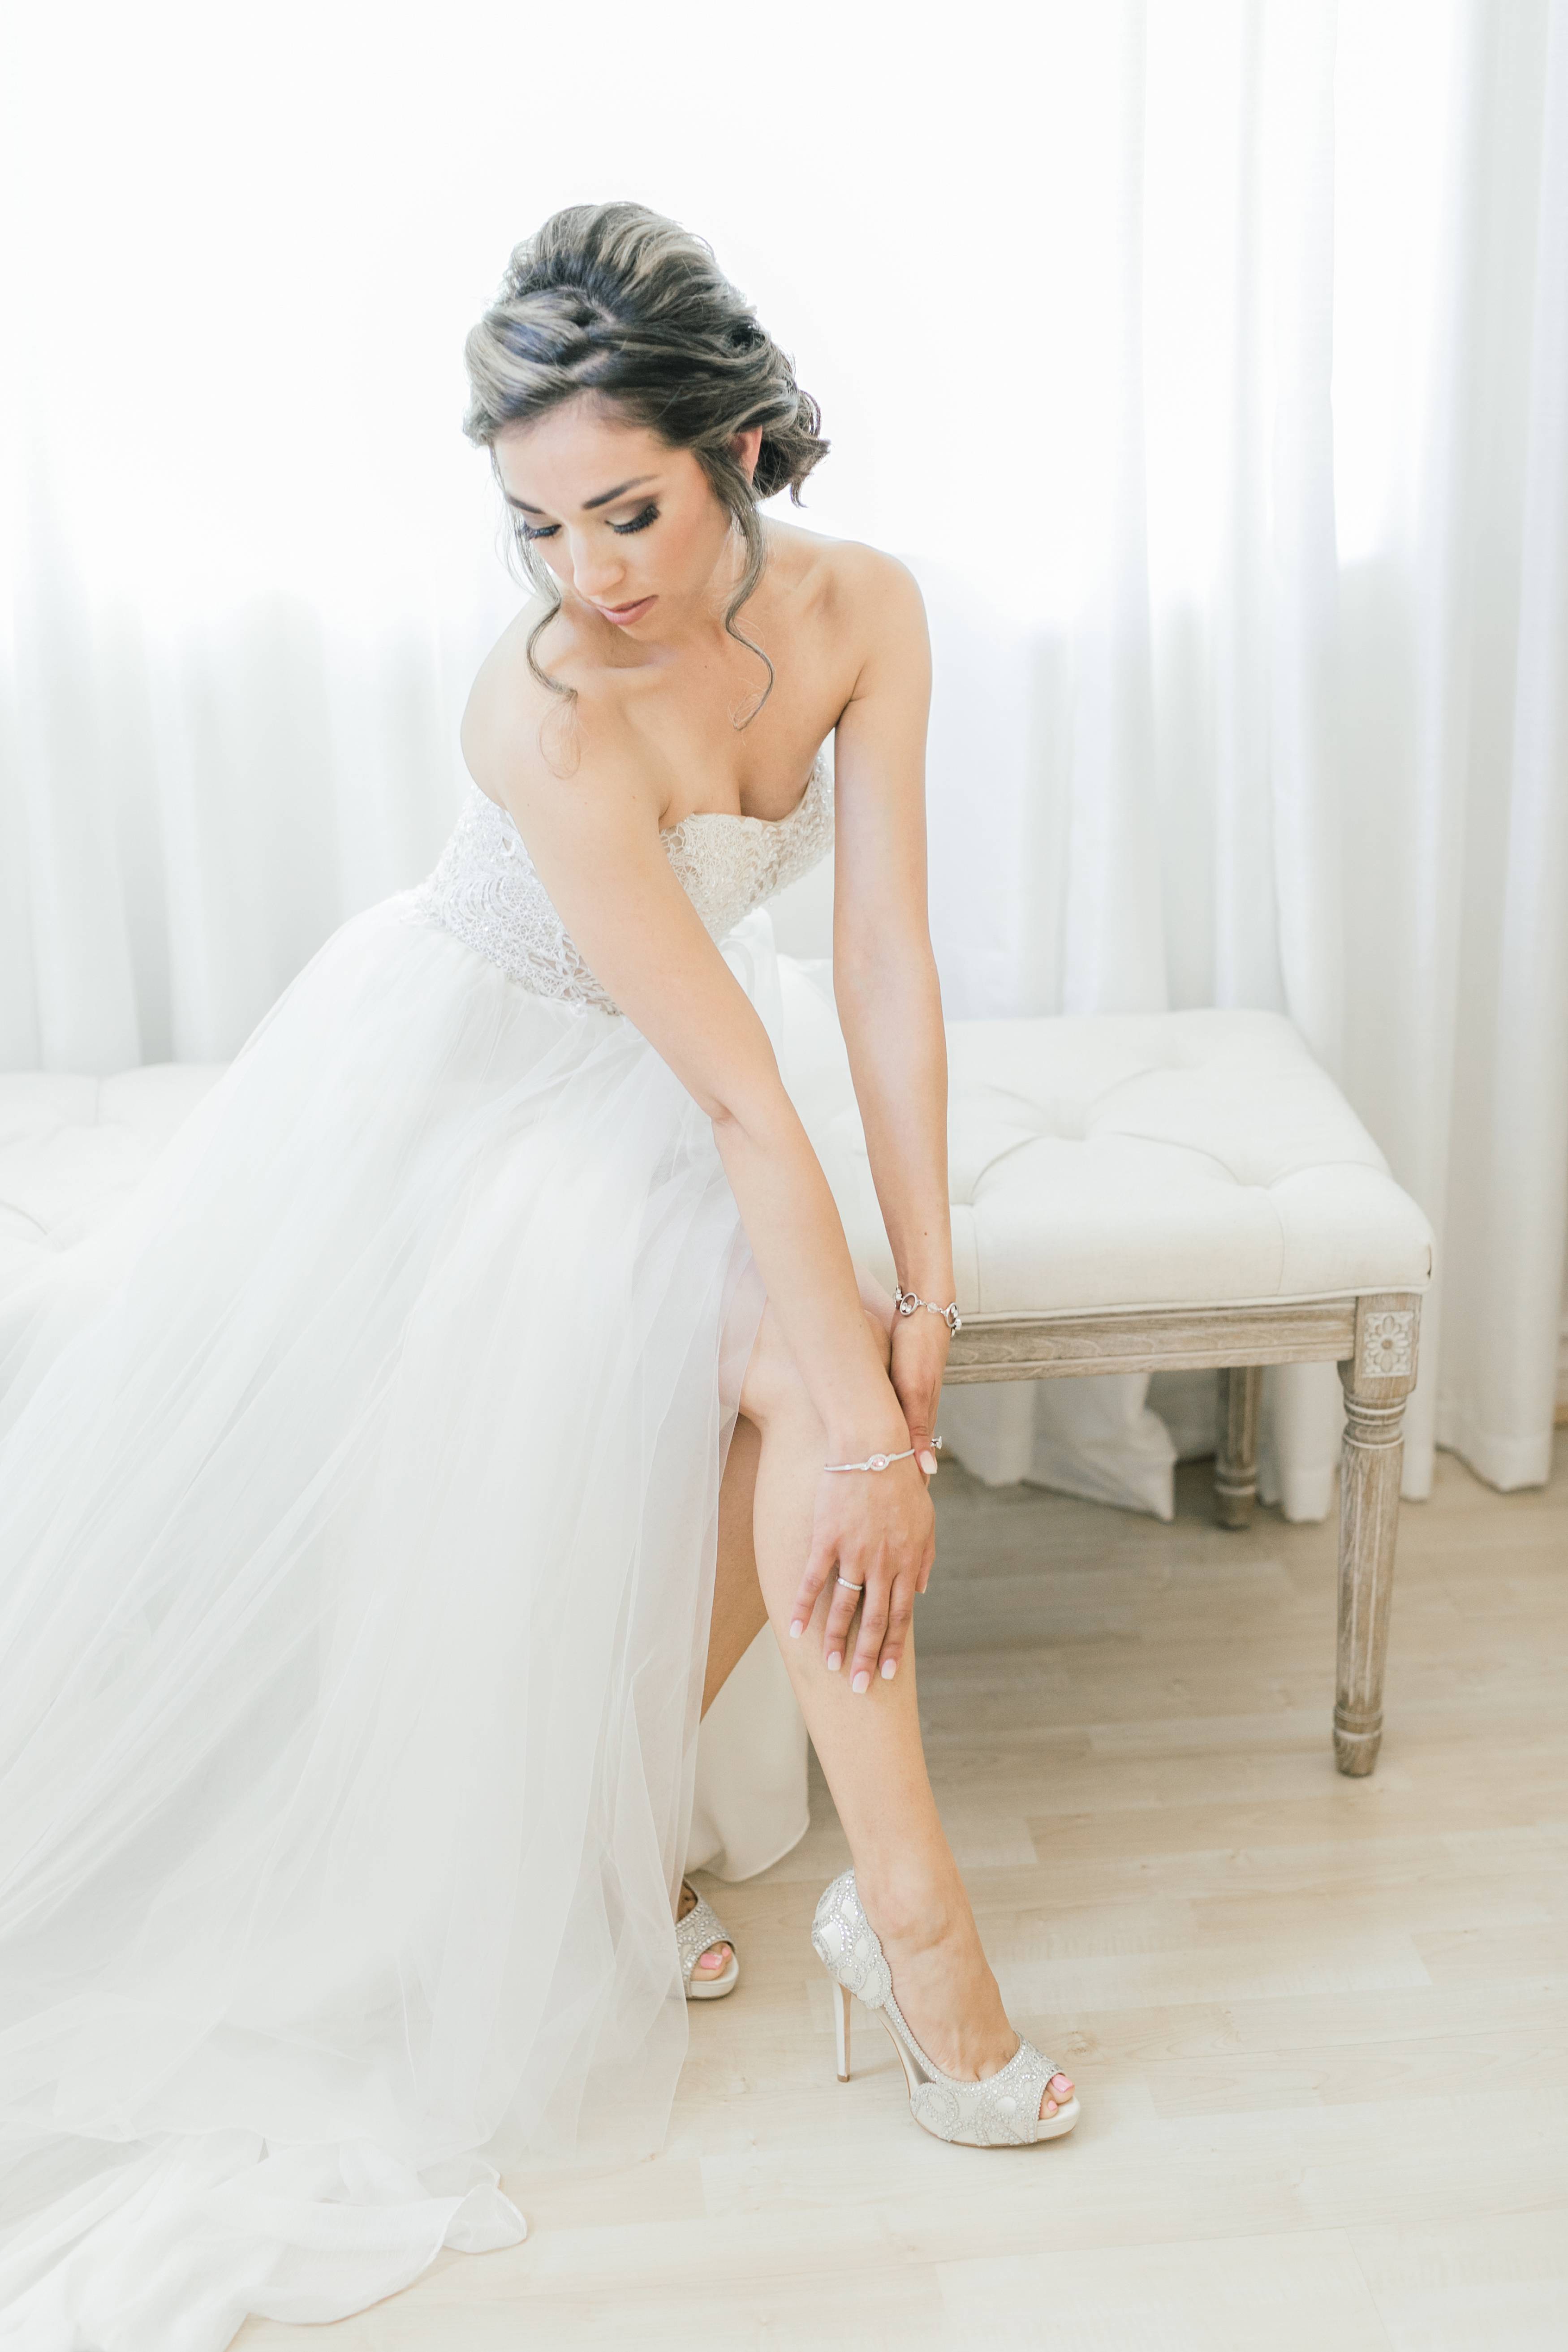 Bridal portraits in white dressing room at Forever and Always Farm wedding venue in Temecula California